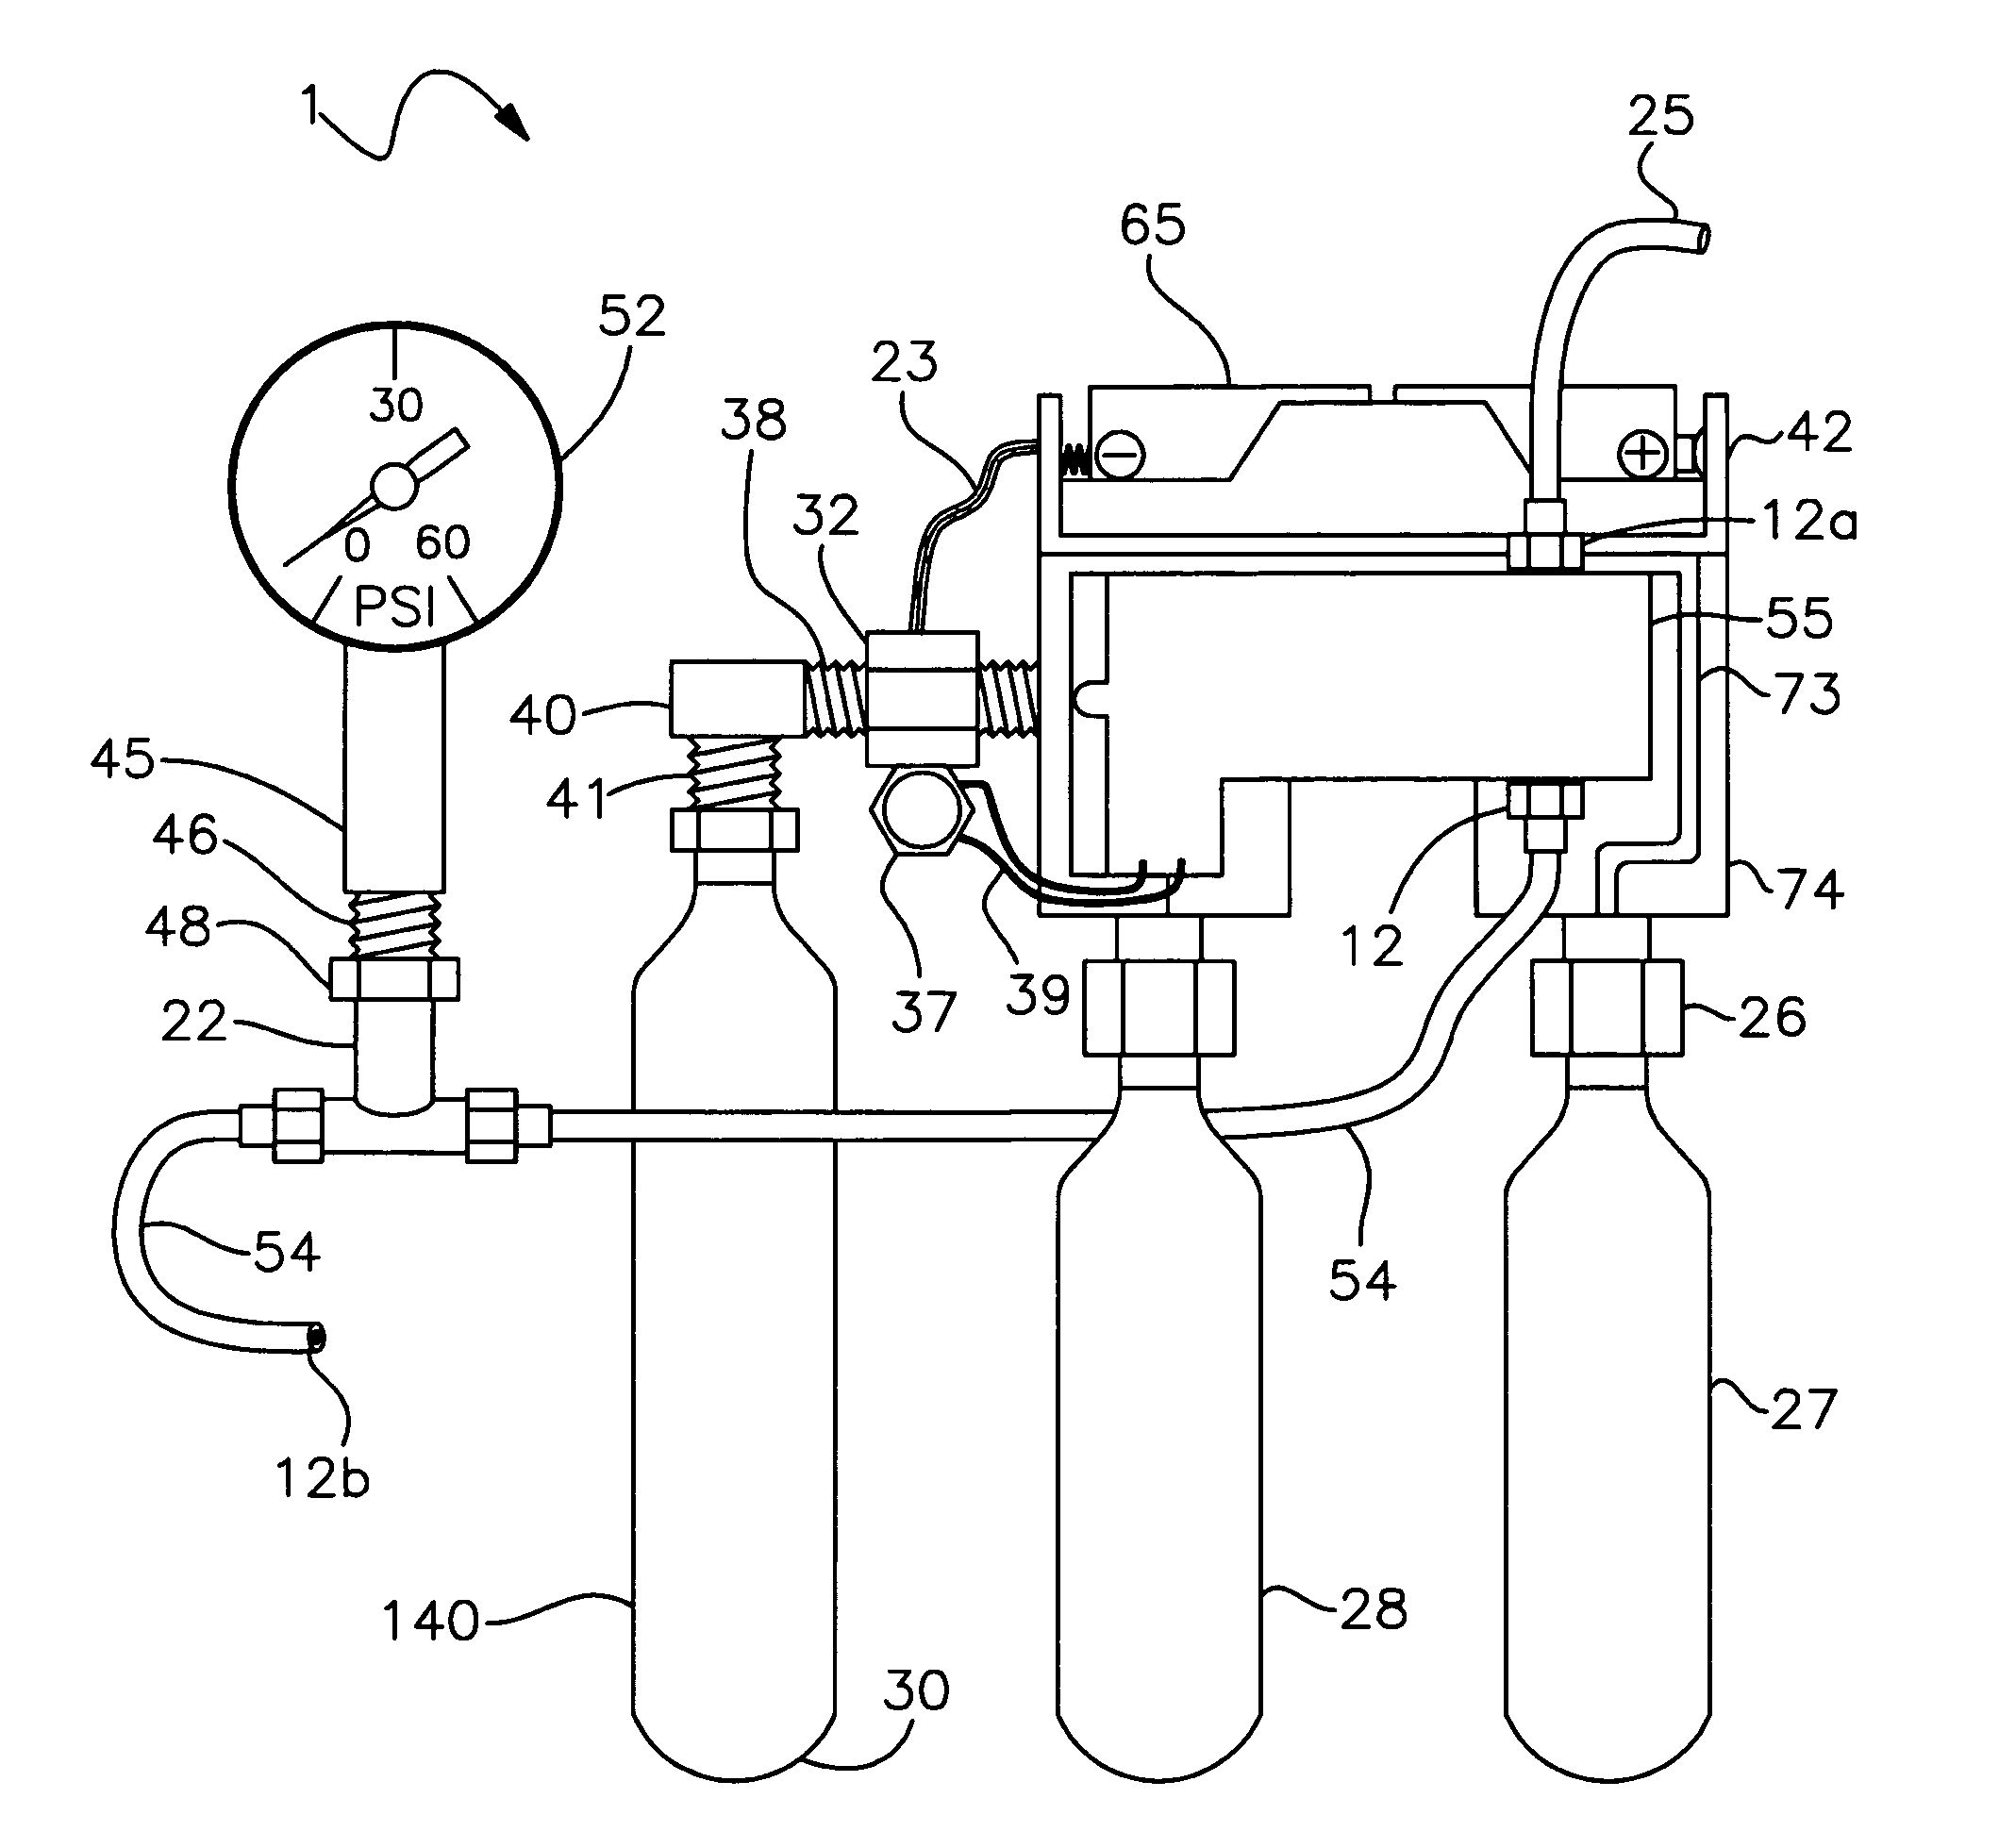 Apparatus and process for producing CO2 enriched medical foam